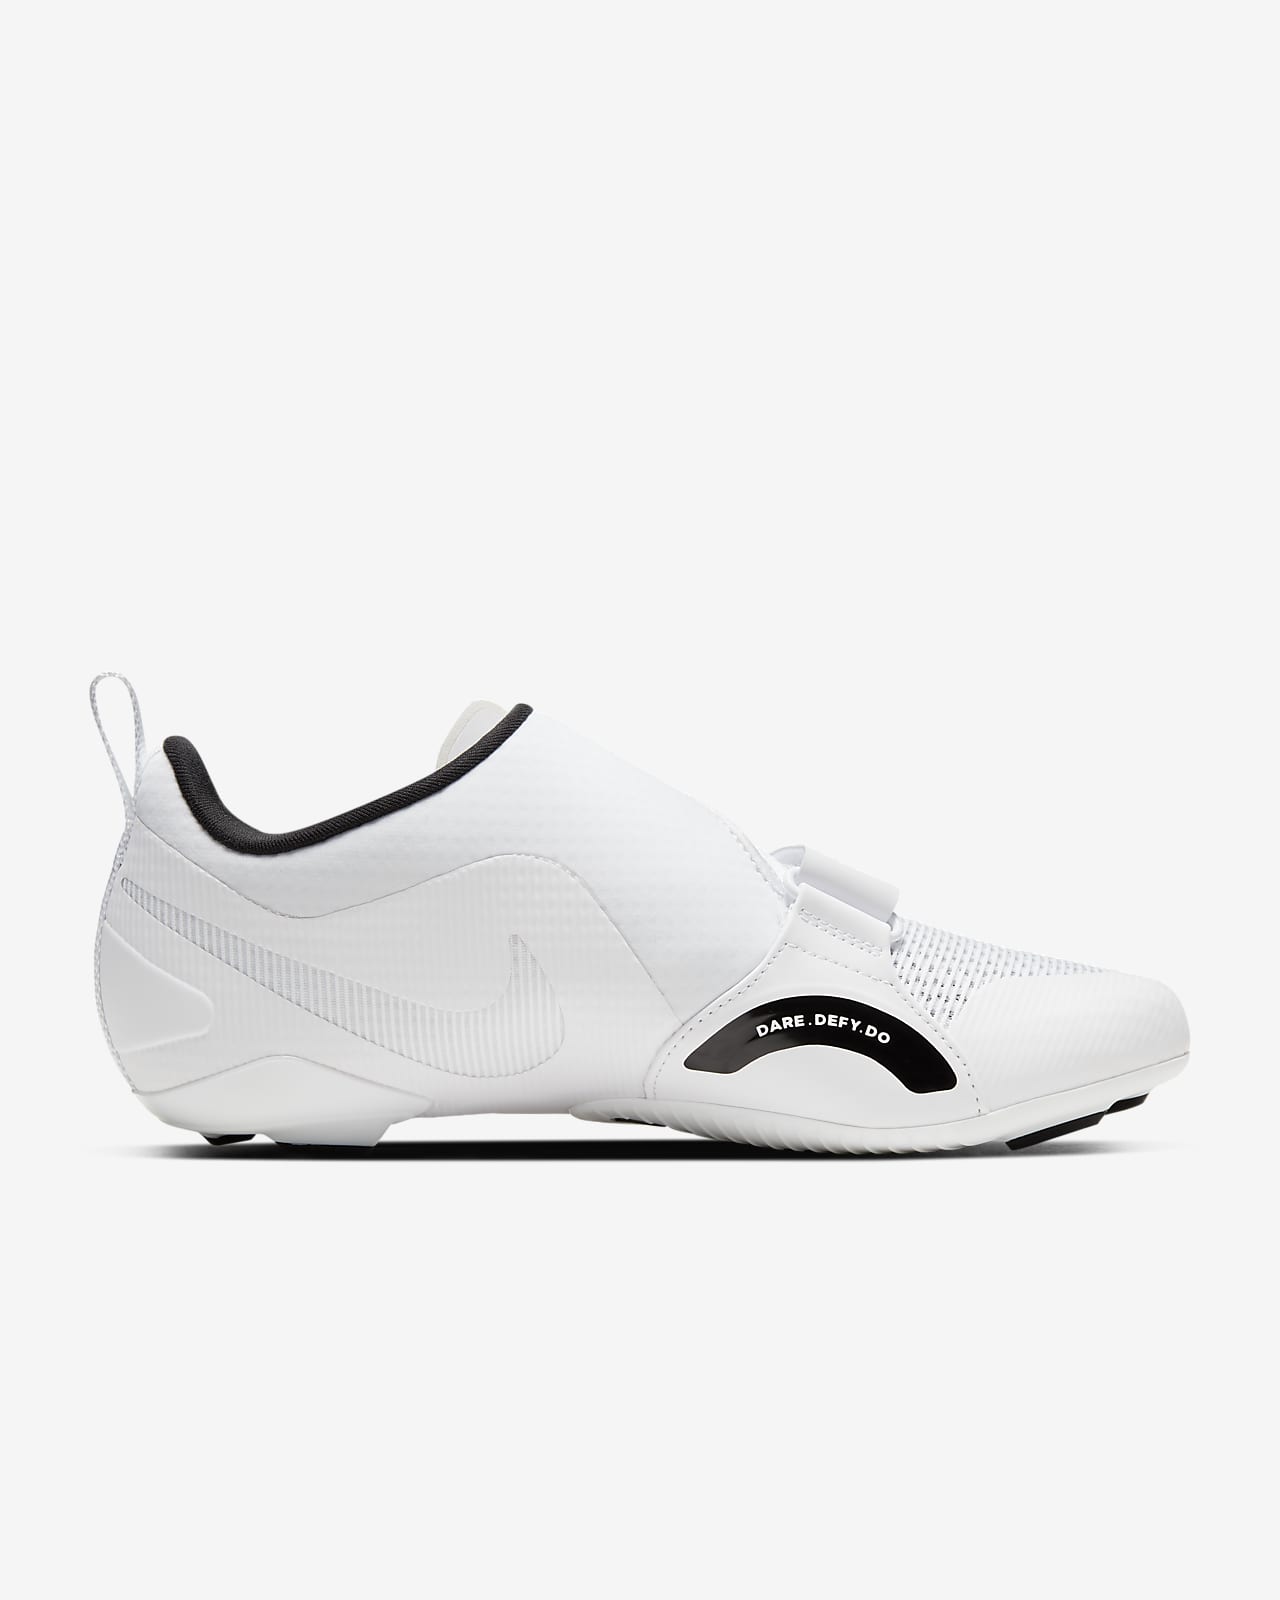 Nike SuperRep Cycle Men's Indoor Cycling Shoes. Nike AE